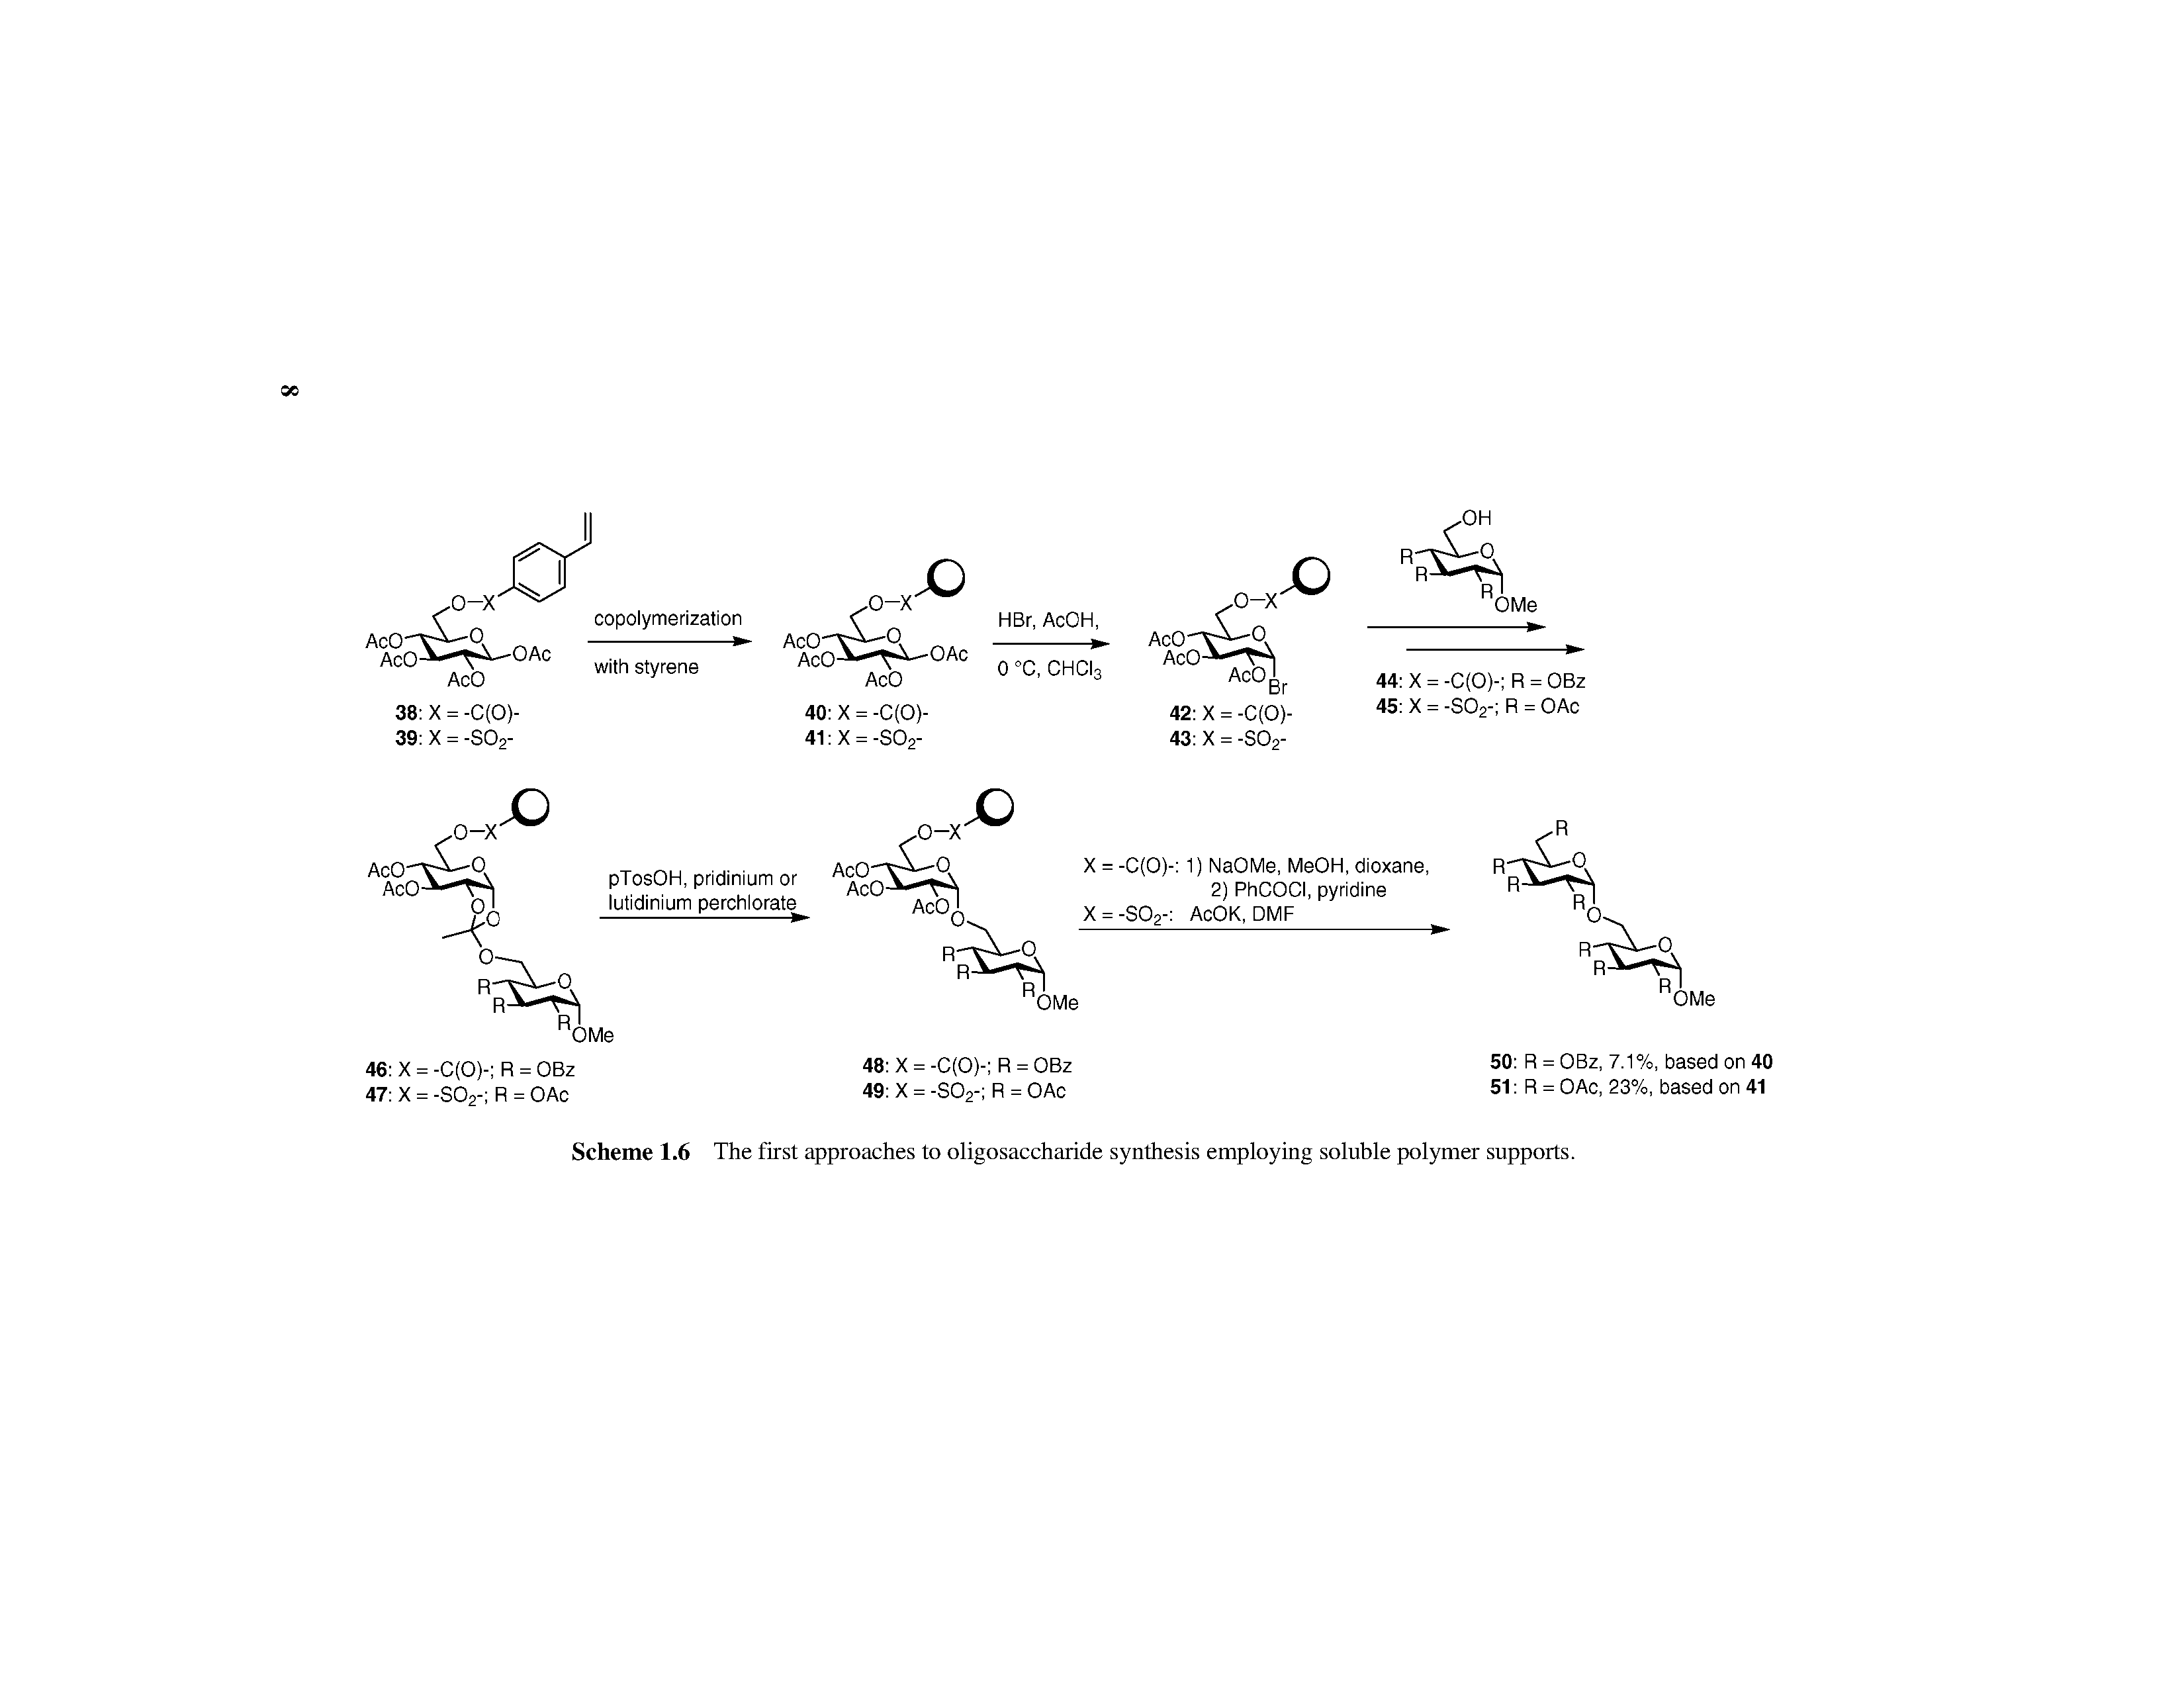 Scheme 1.6 The first approaches to oligosaccharide synthesis employing soluble polymer supports.